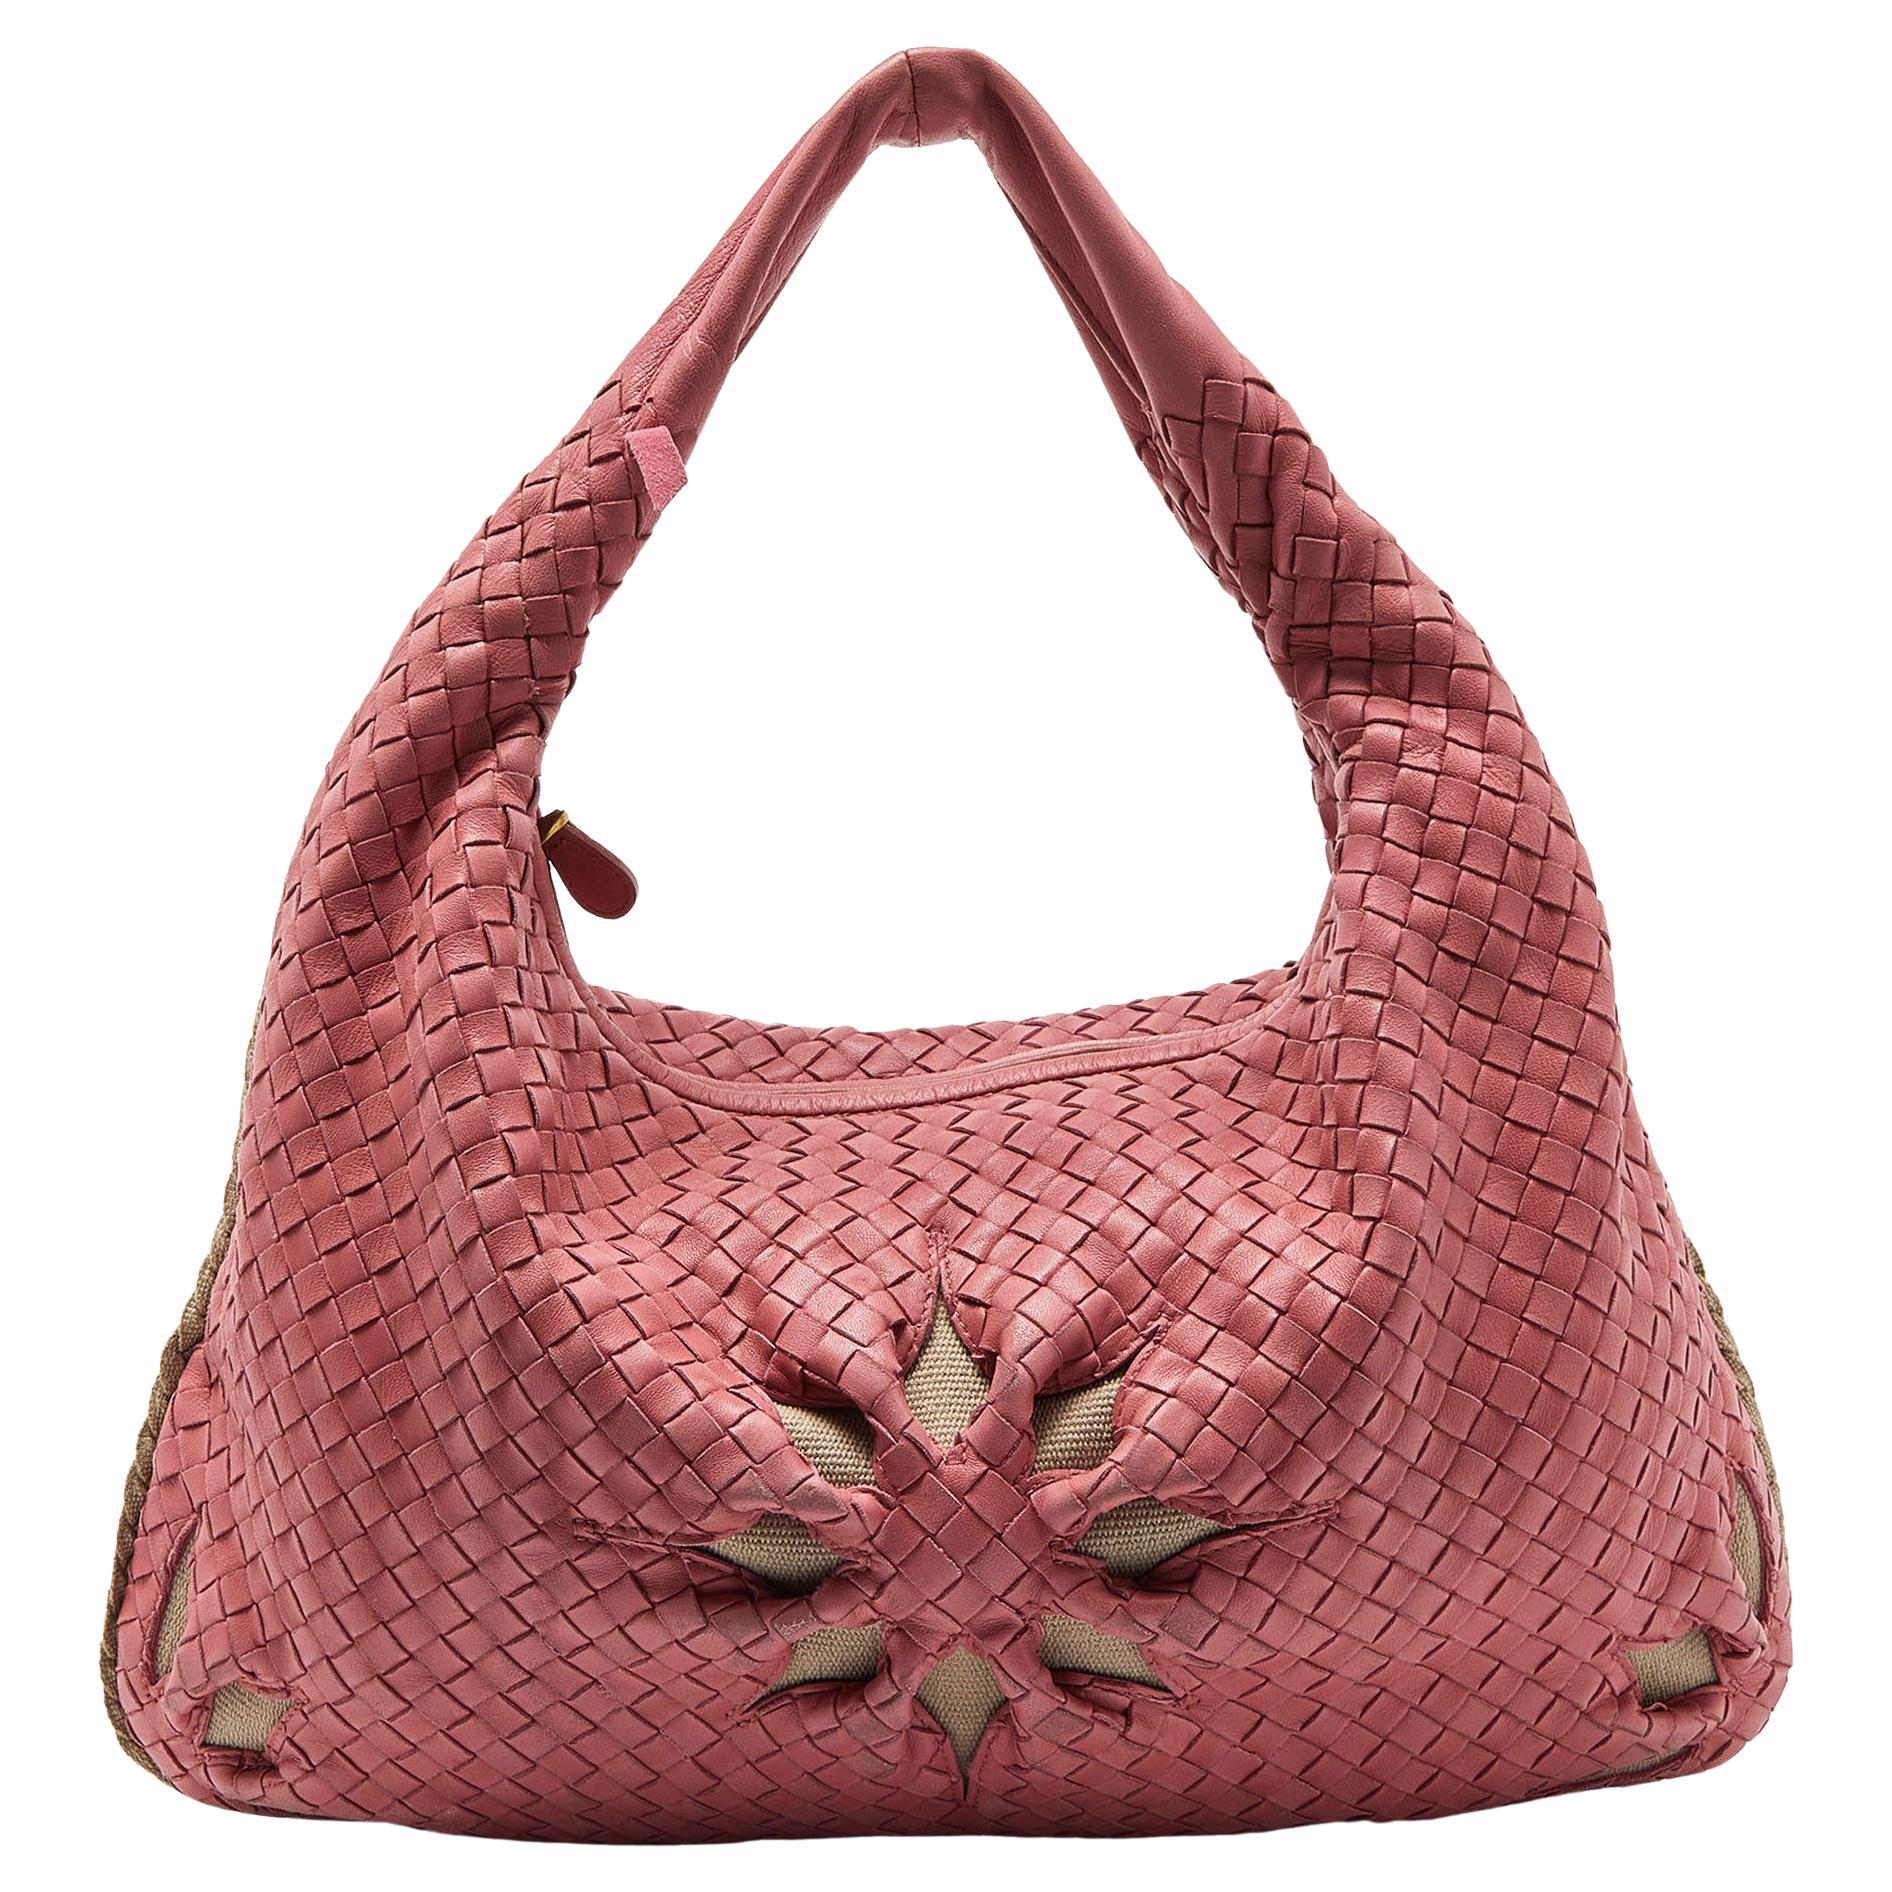 Signature sufflette leather handbag Coach Pink in Leather - 34258053